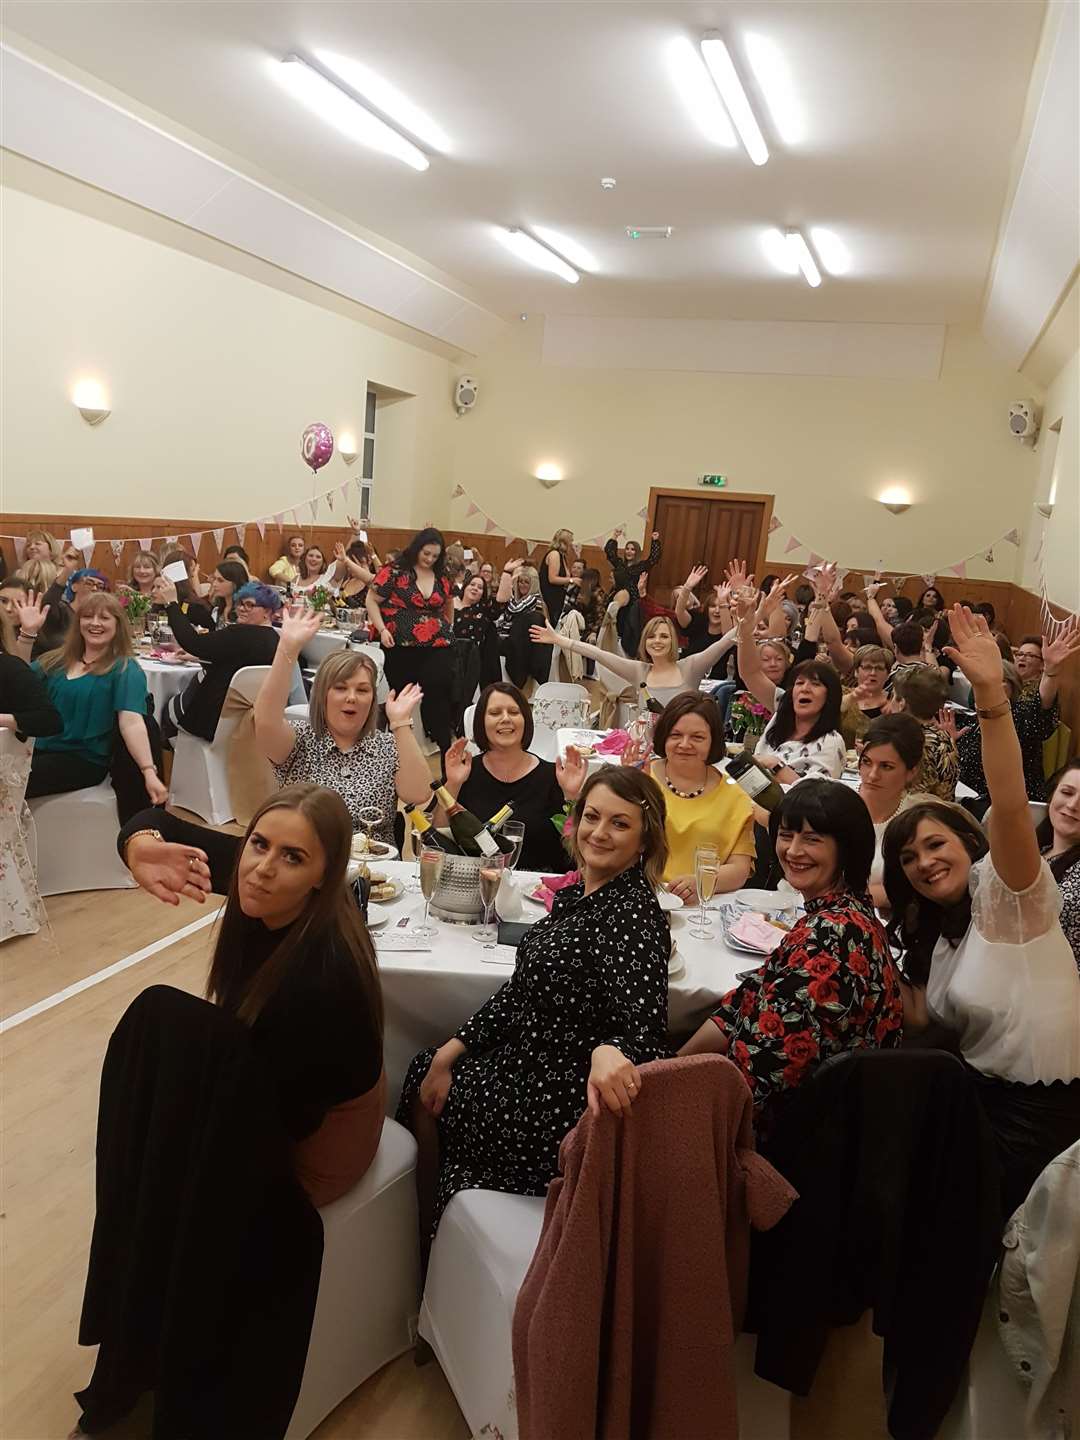 Heather Stephen's prosecco day attracted more than 100 women to Boharm Public Hall.